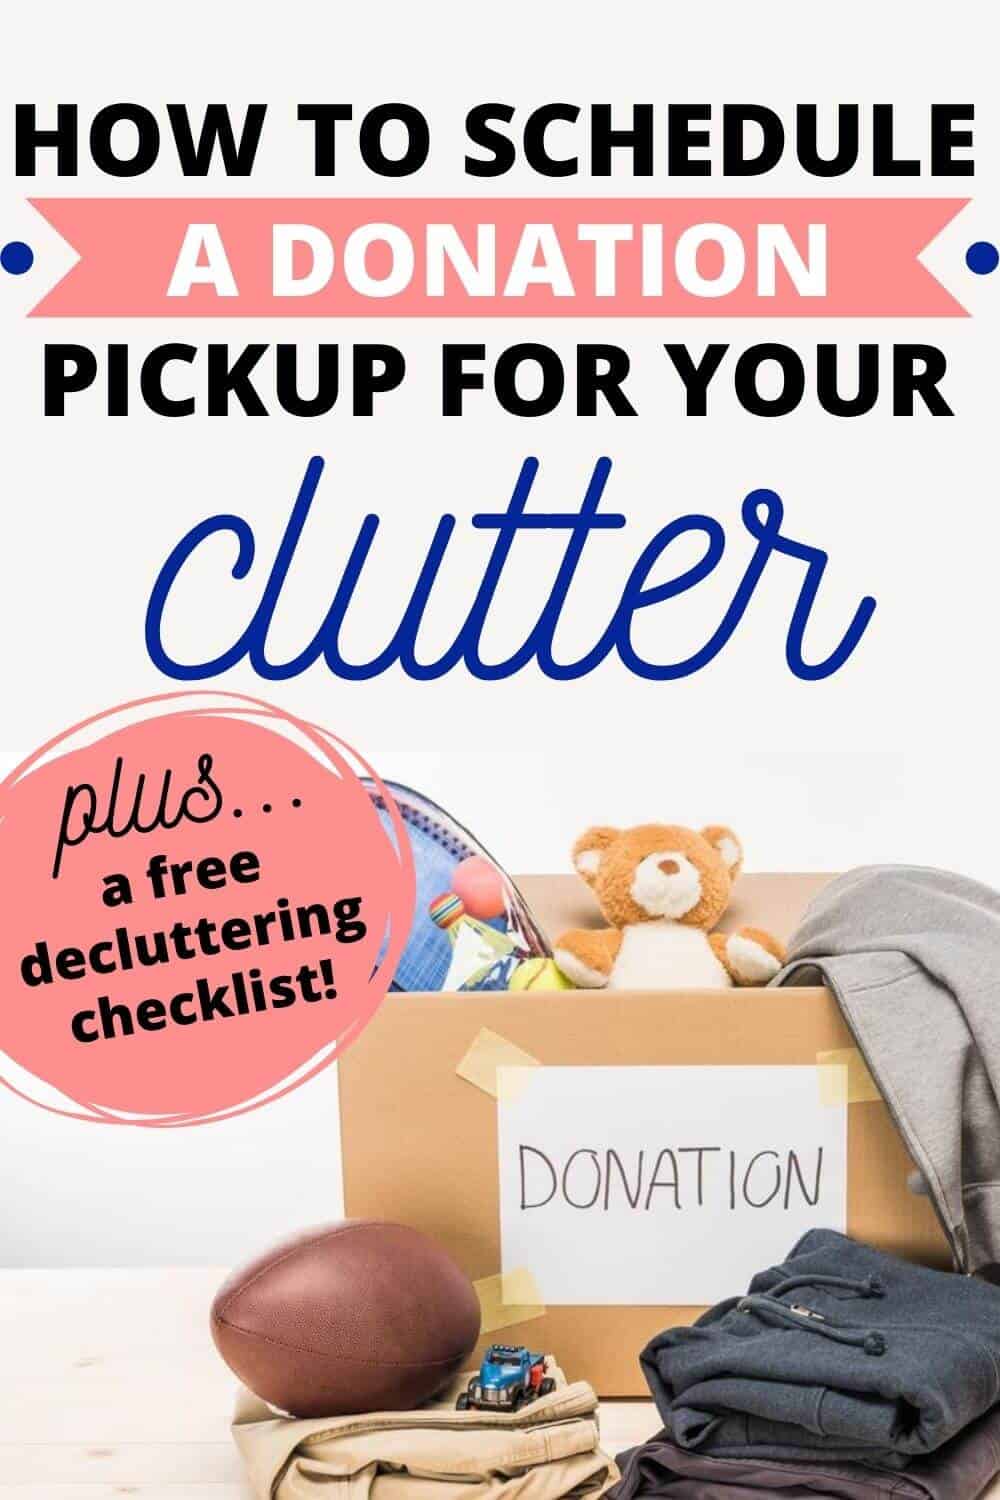 Scheduling a Donation Pickup for Your Clutter